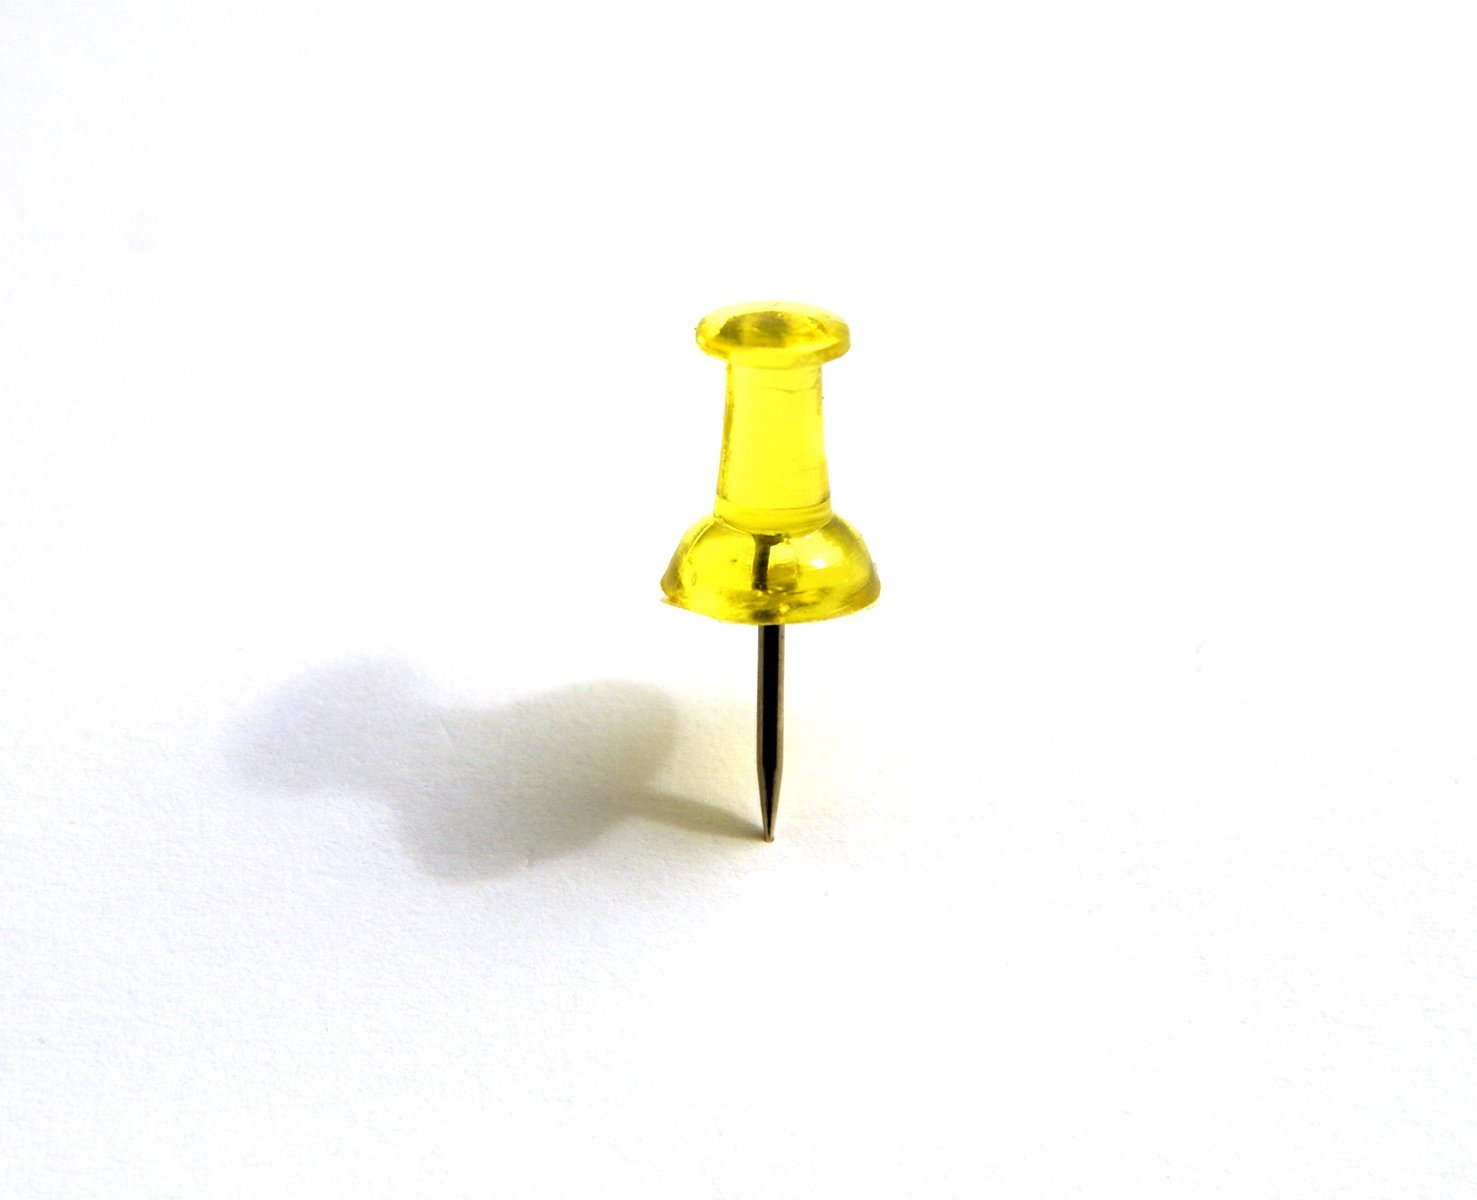 a small yellow object is posed on the ground